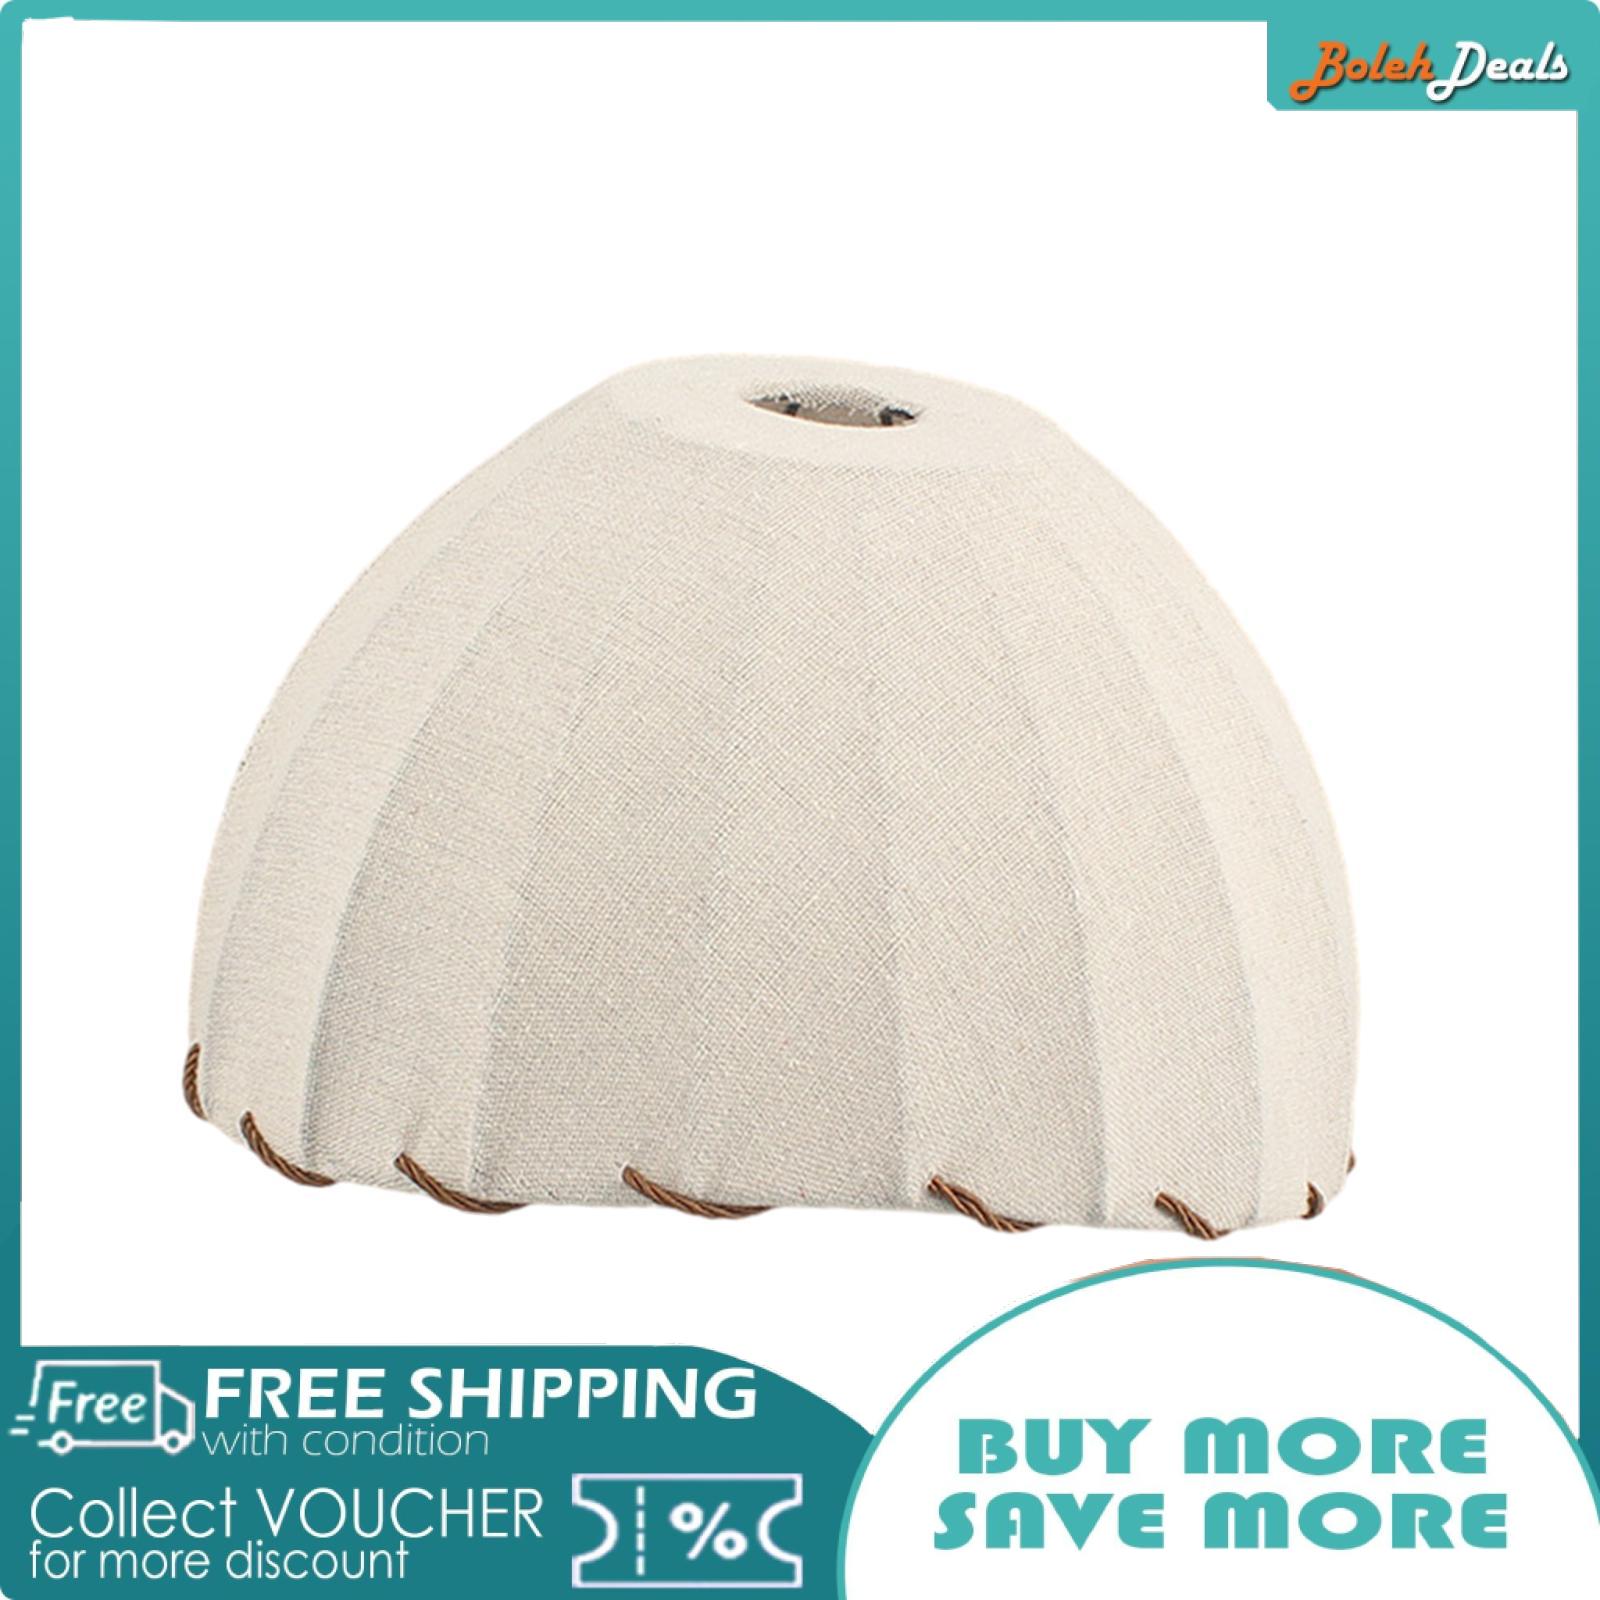 BolehDeals Table Lamp Shade Cover Fixture Cover for Cafe Bedroom Study Room